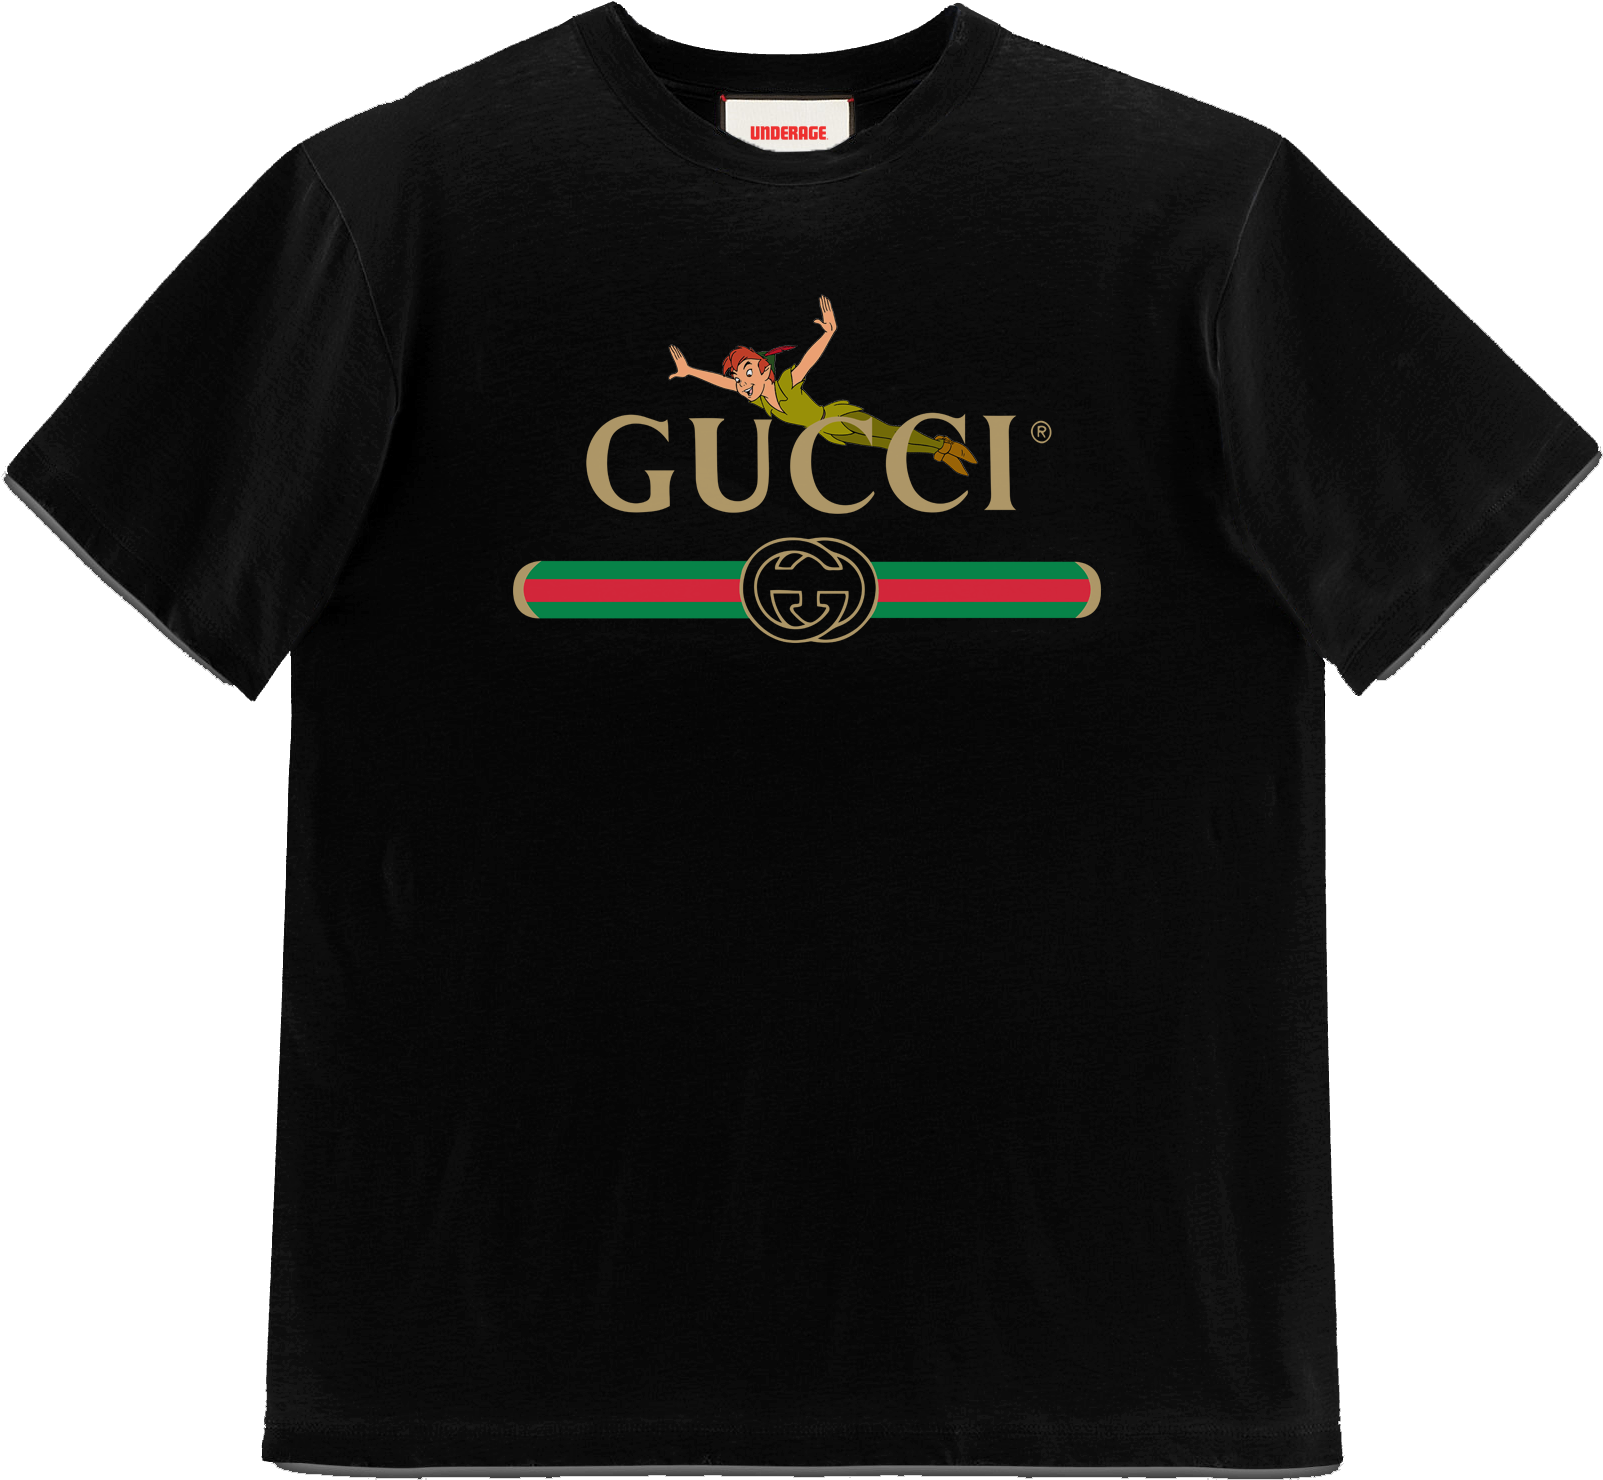 Gucci Shirt Png - Hard Rock Cafe Polo Clipart - Large Size Png Image ...